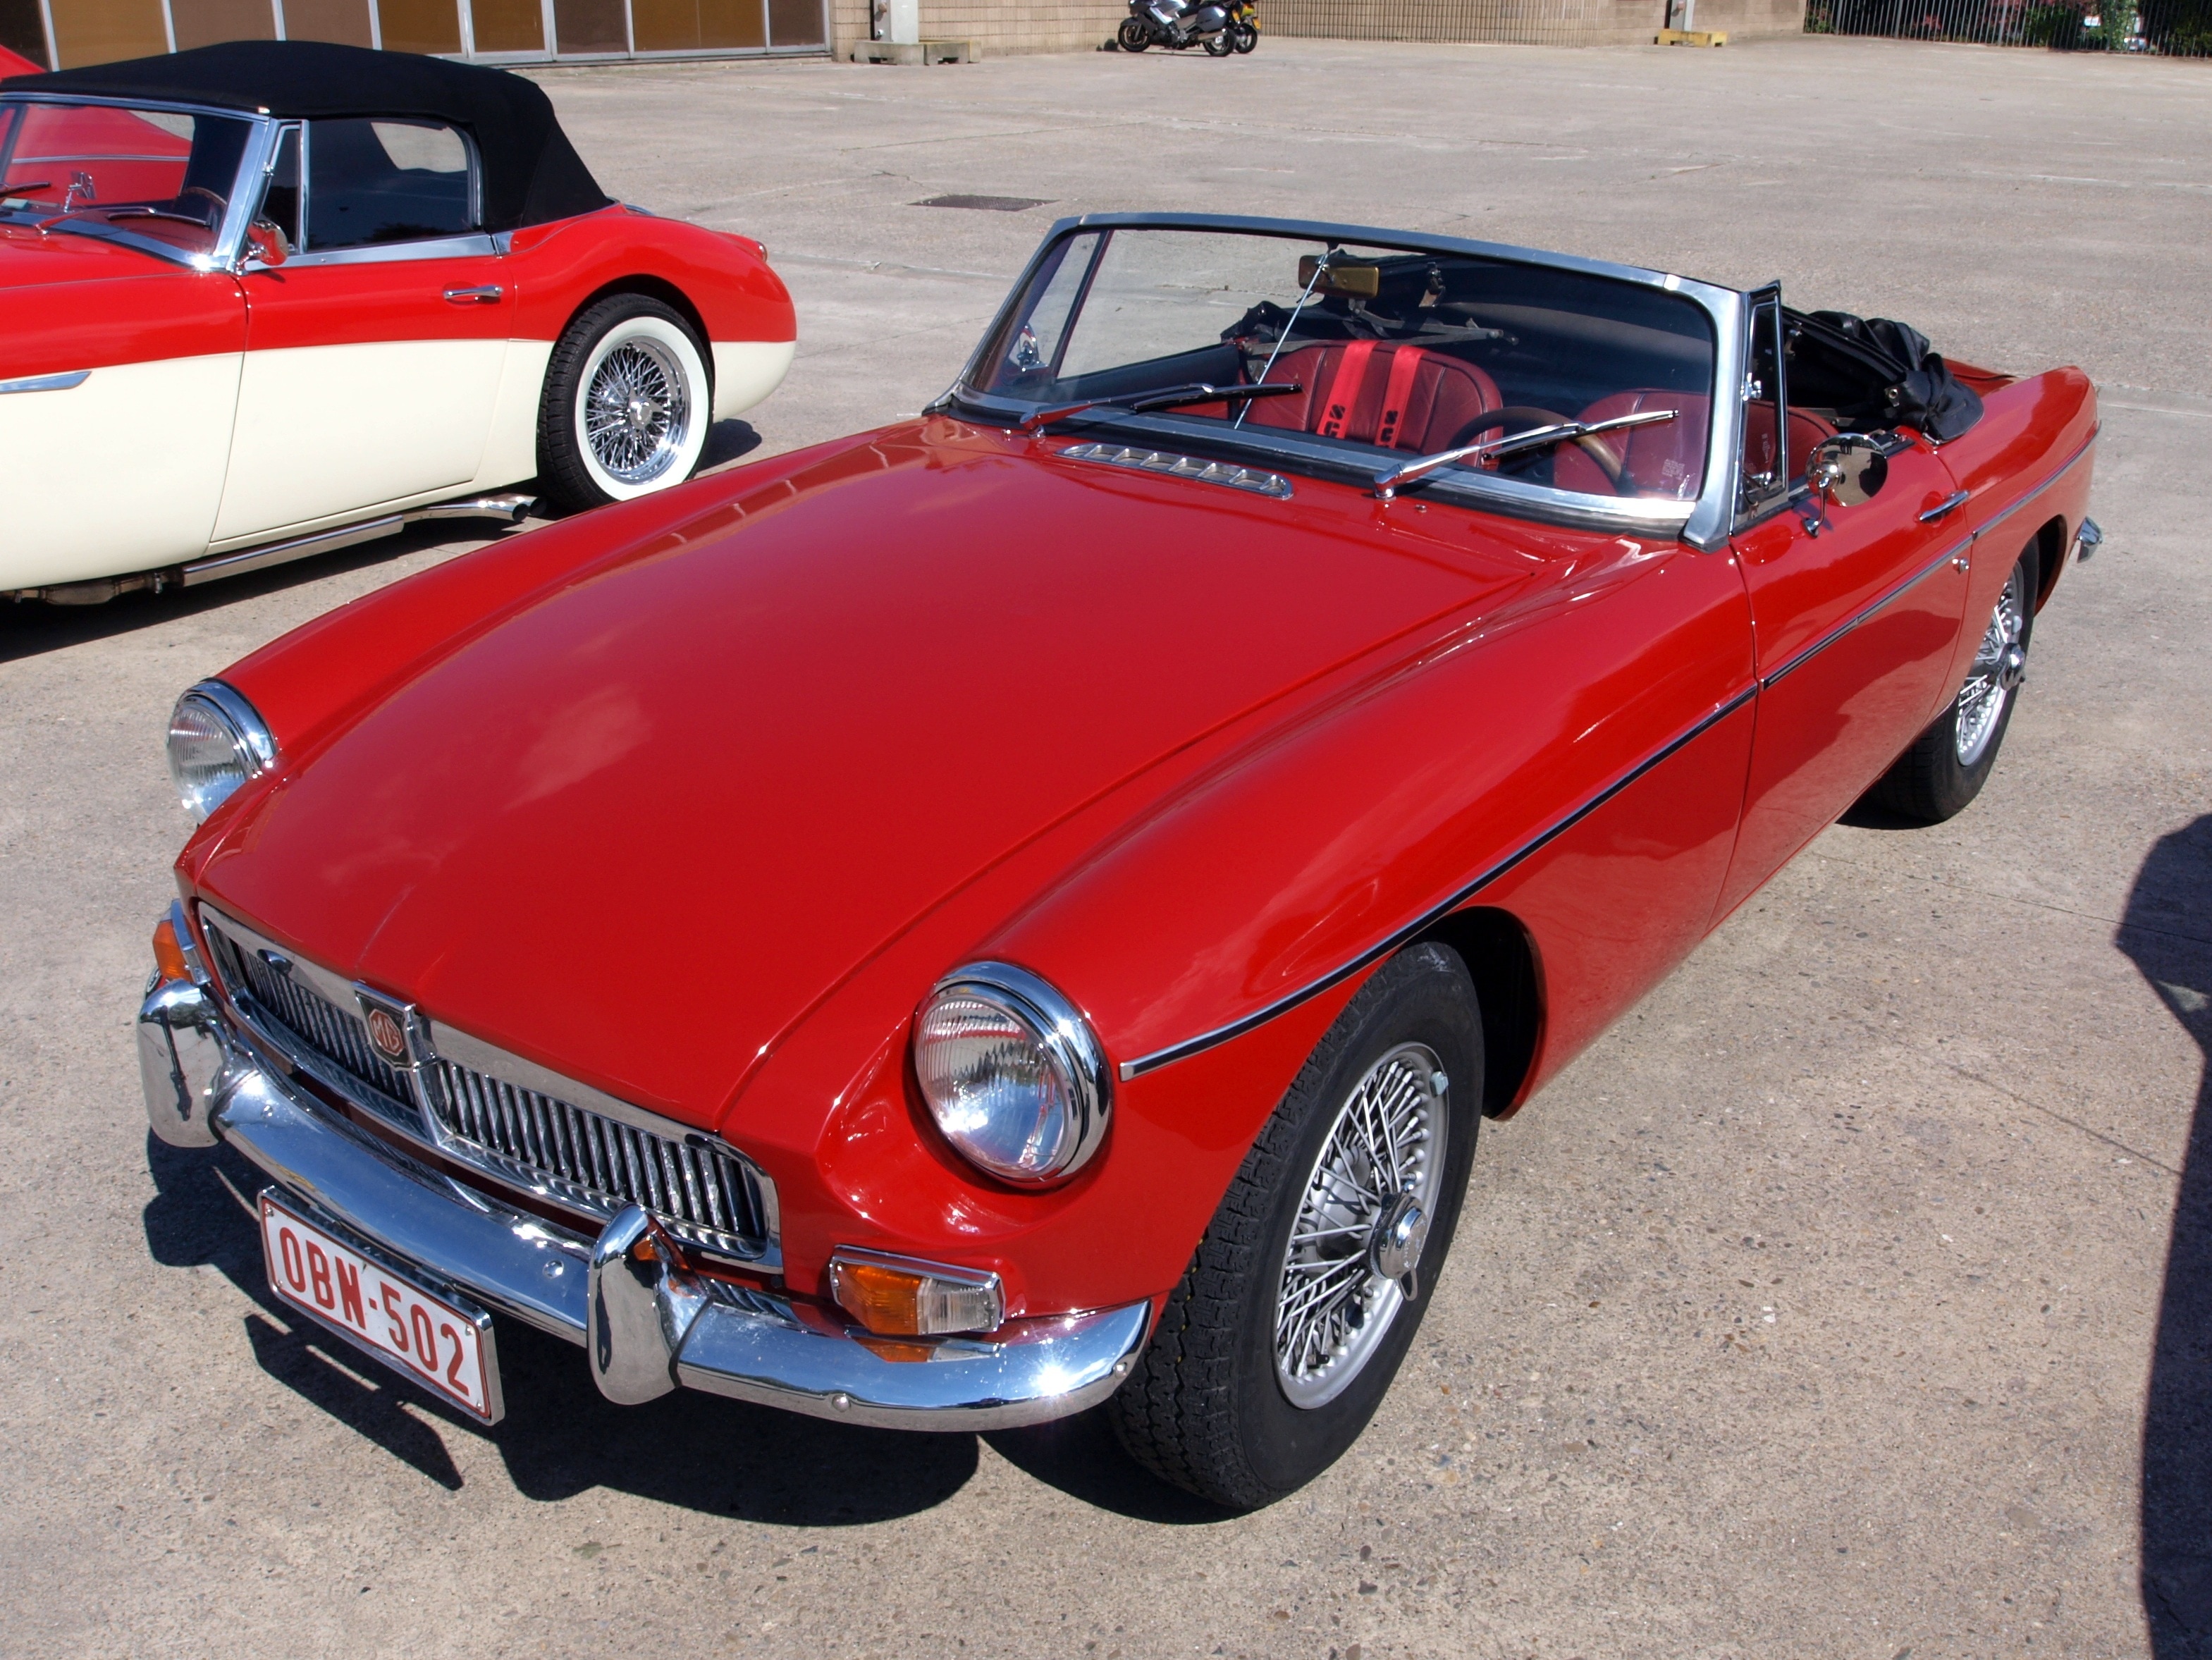 Red Classic Mg Roadster Free Image Peakpx